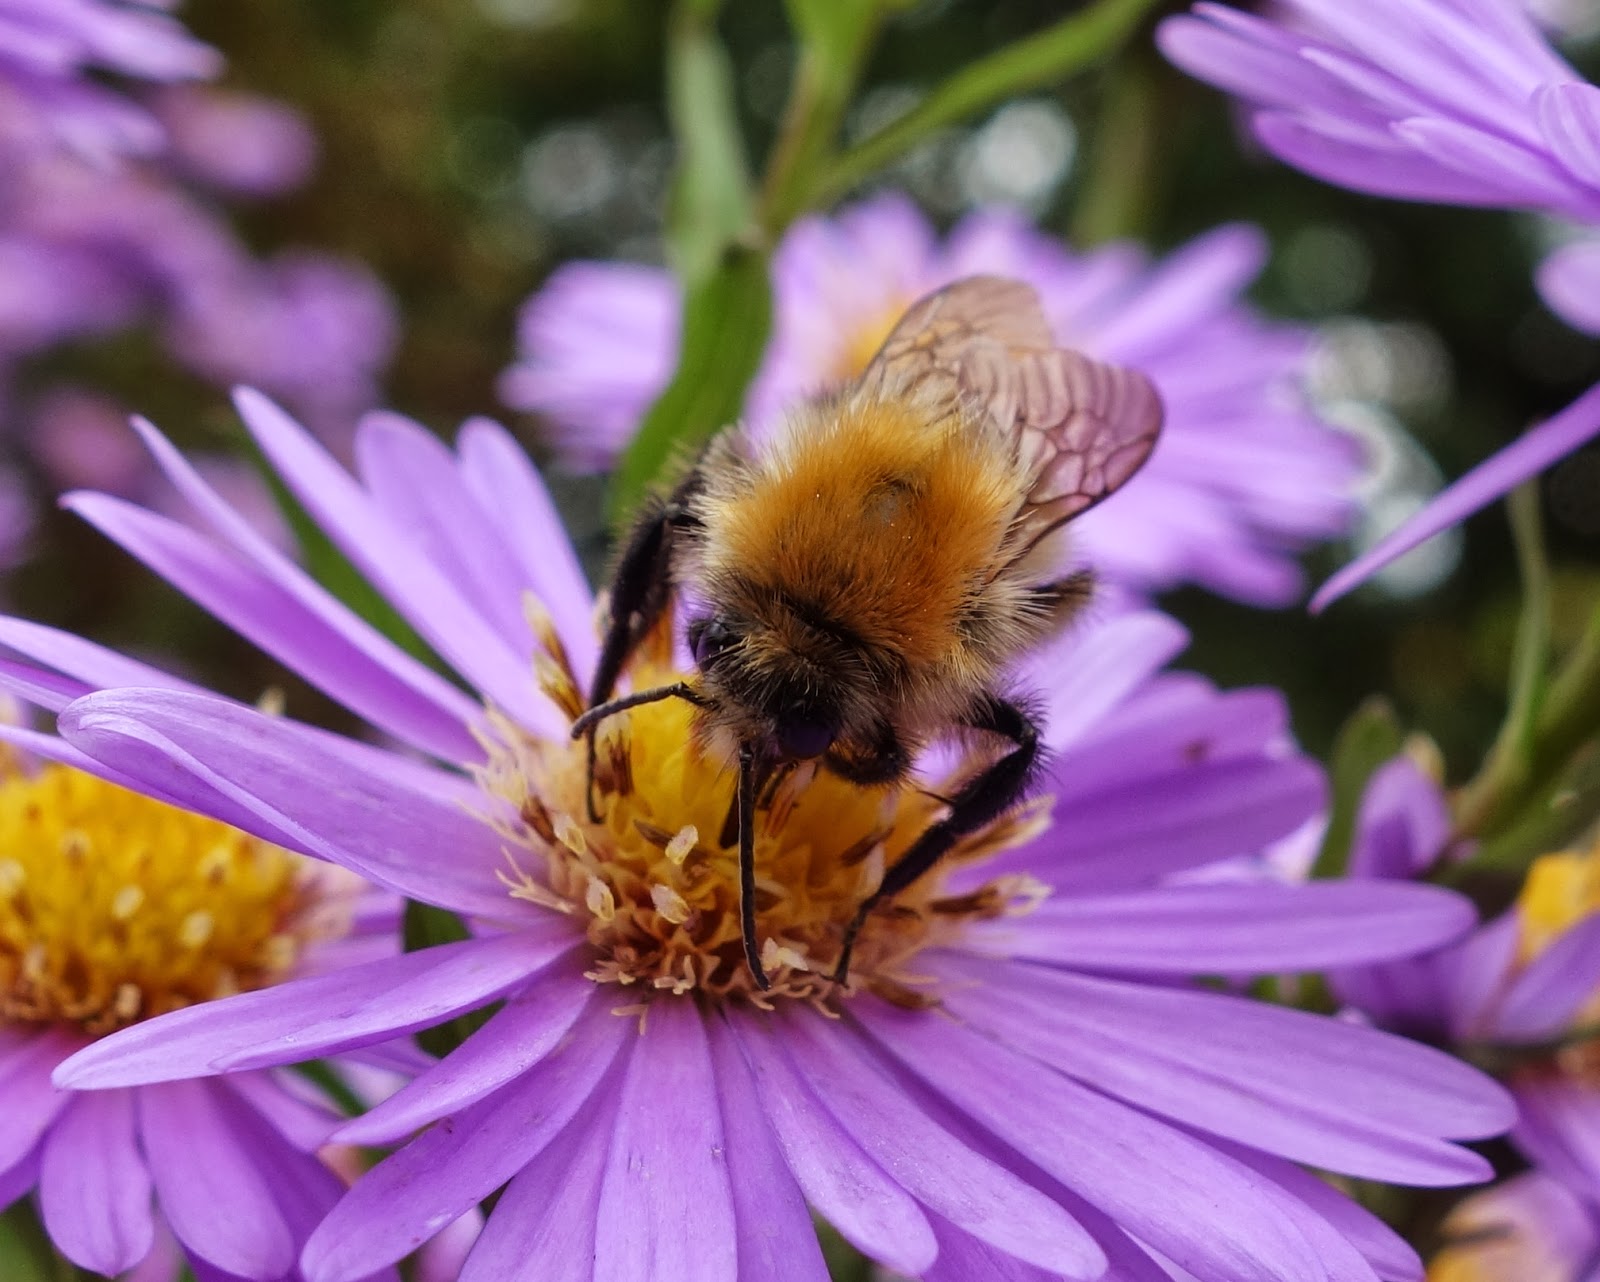 Urban Pollinators: Late pollinators still out and about